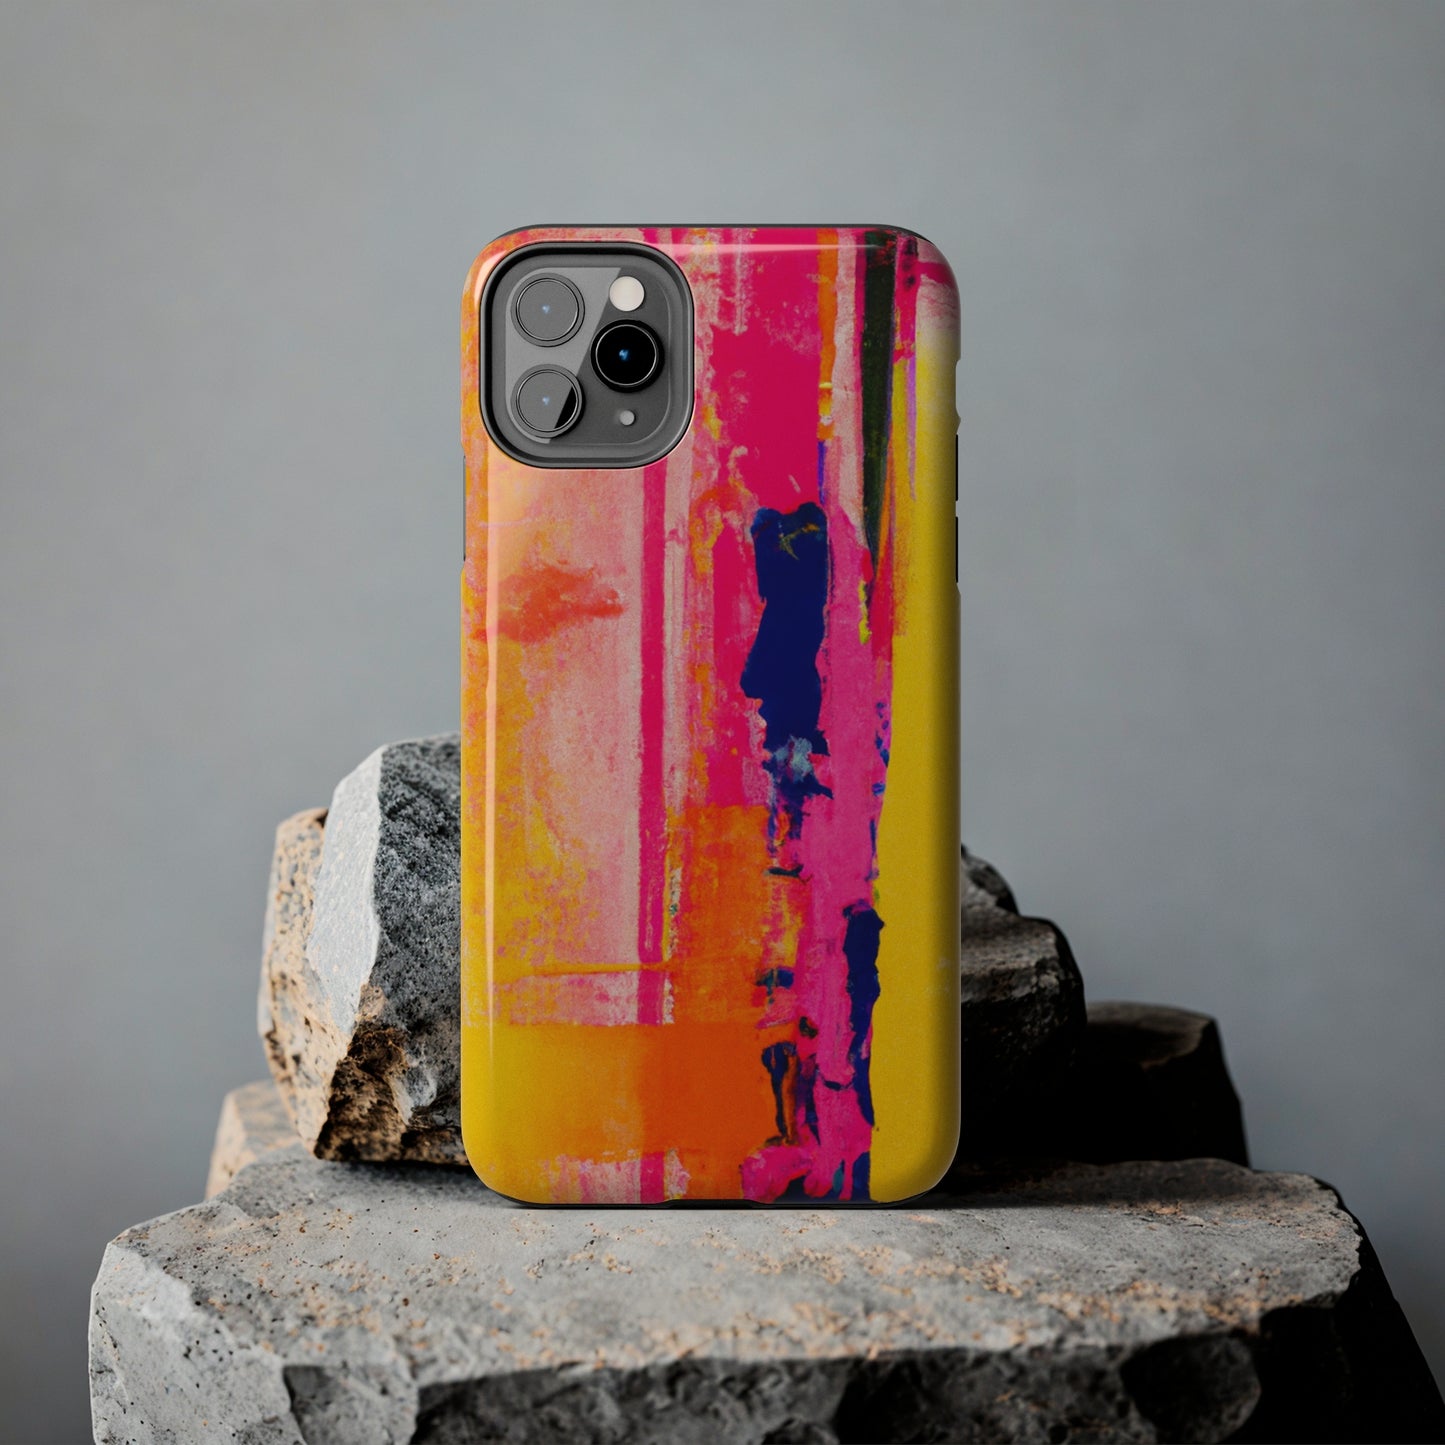 Tough Apple iPhone Cases Ft. Abstract Glitch